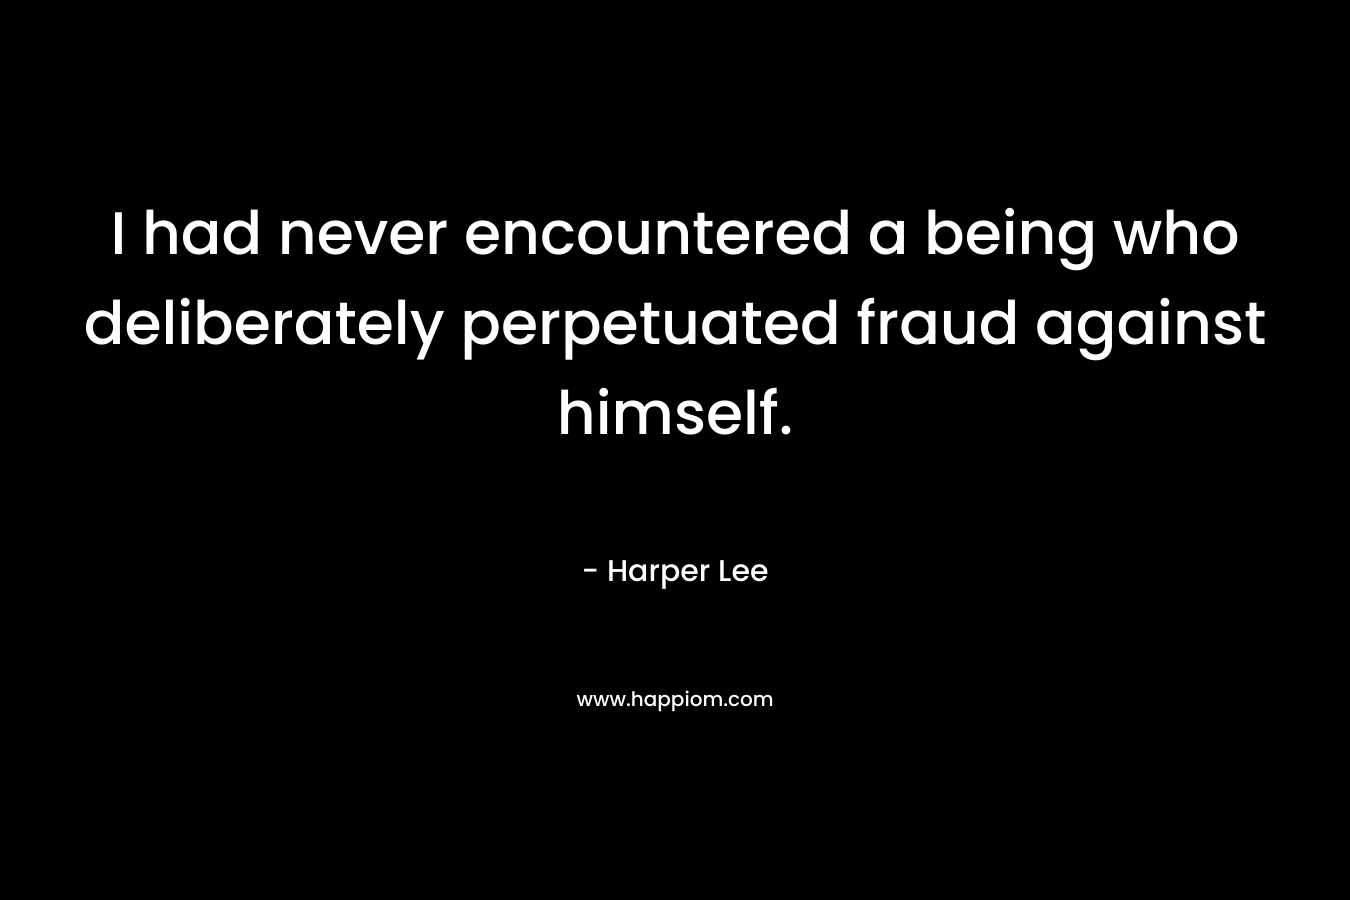 I had never encountered a being who deliberately perpetuated fraud against himself. – Harper Lee